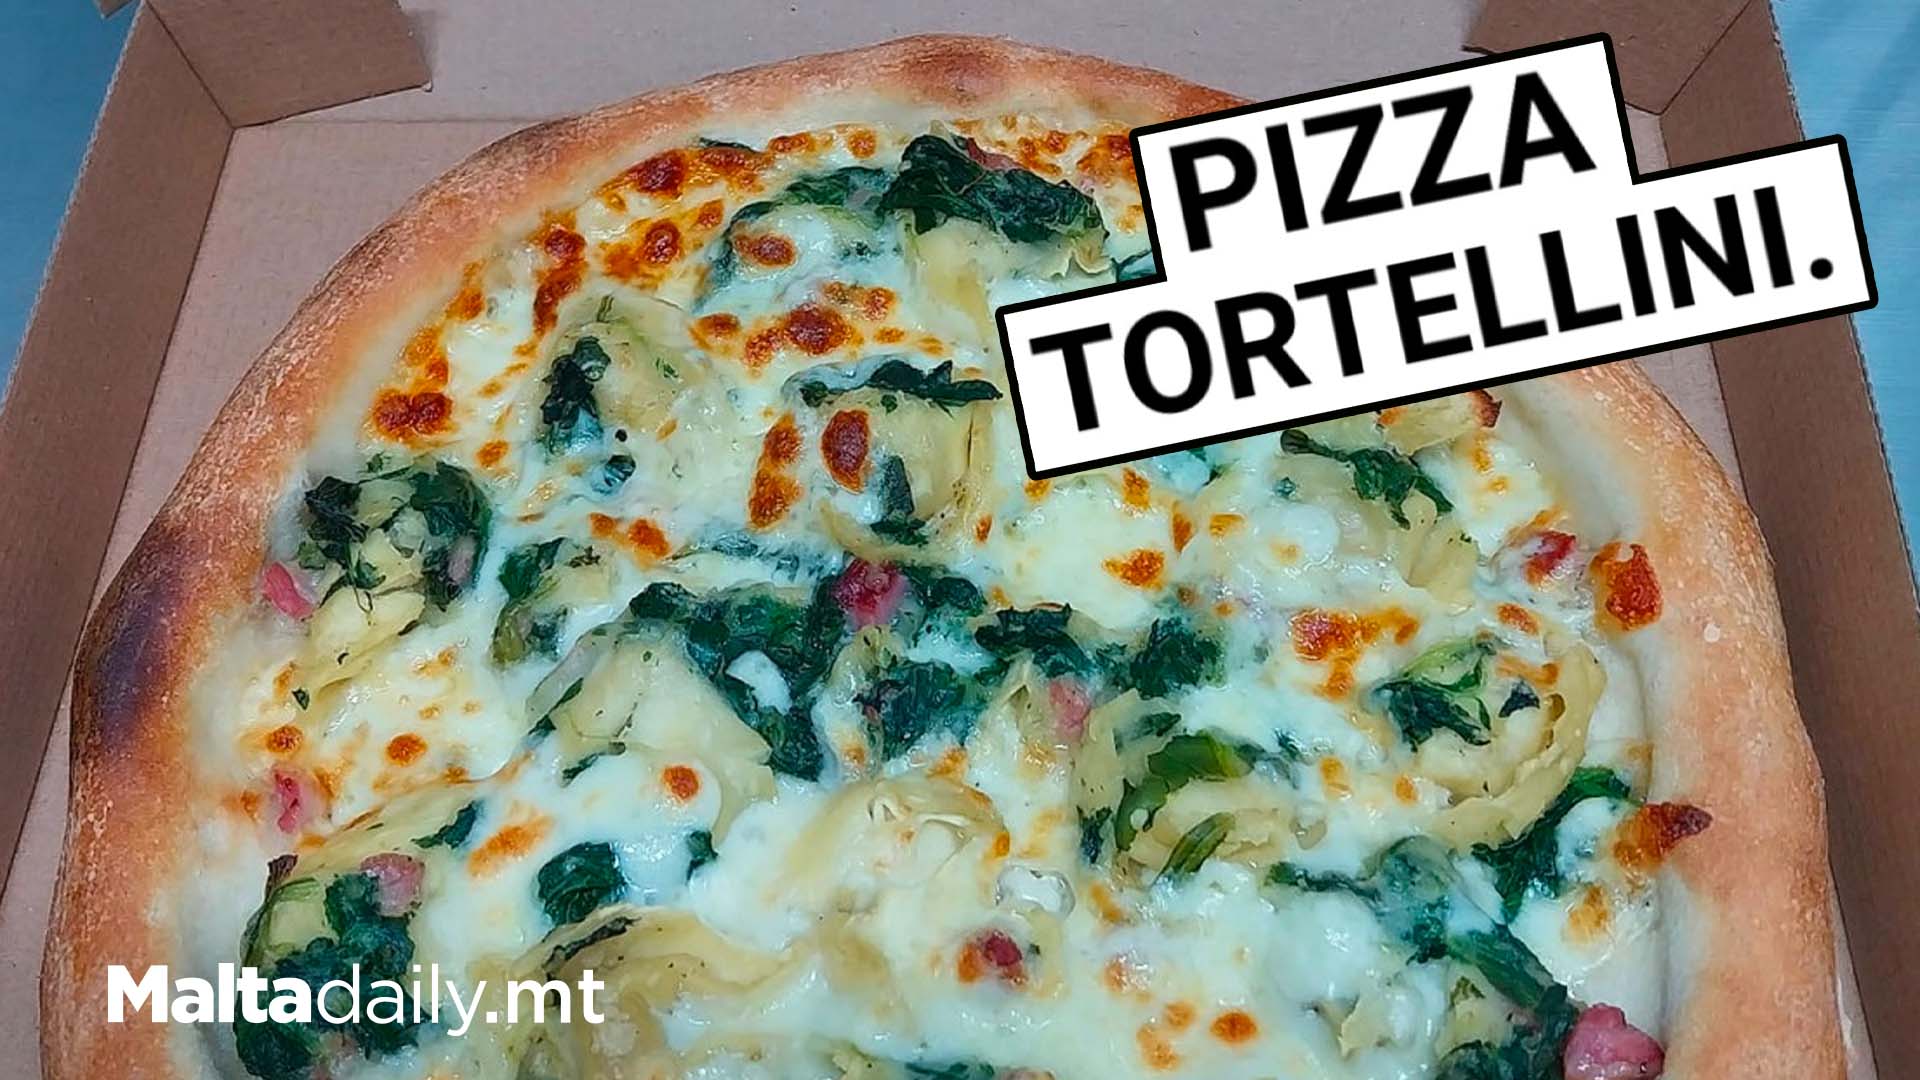 Would You Try A Pizza Tortellini?